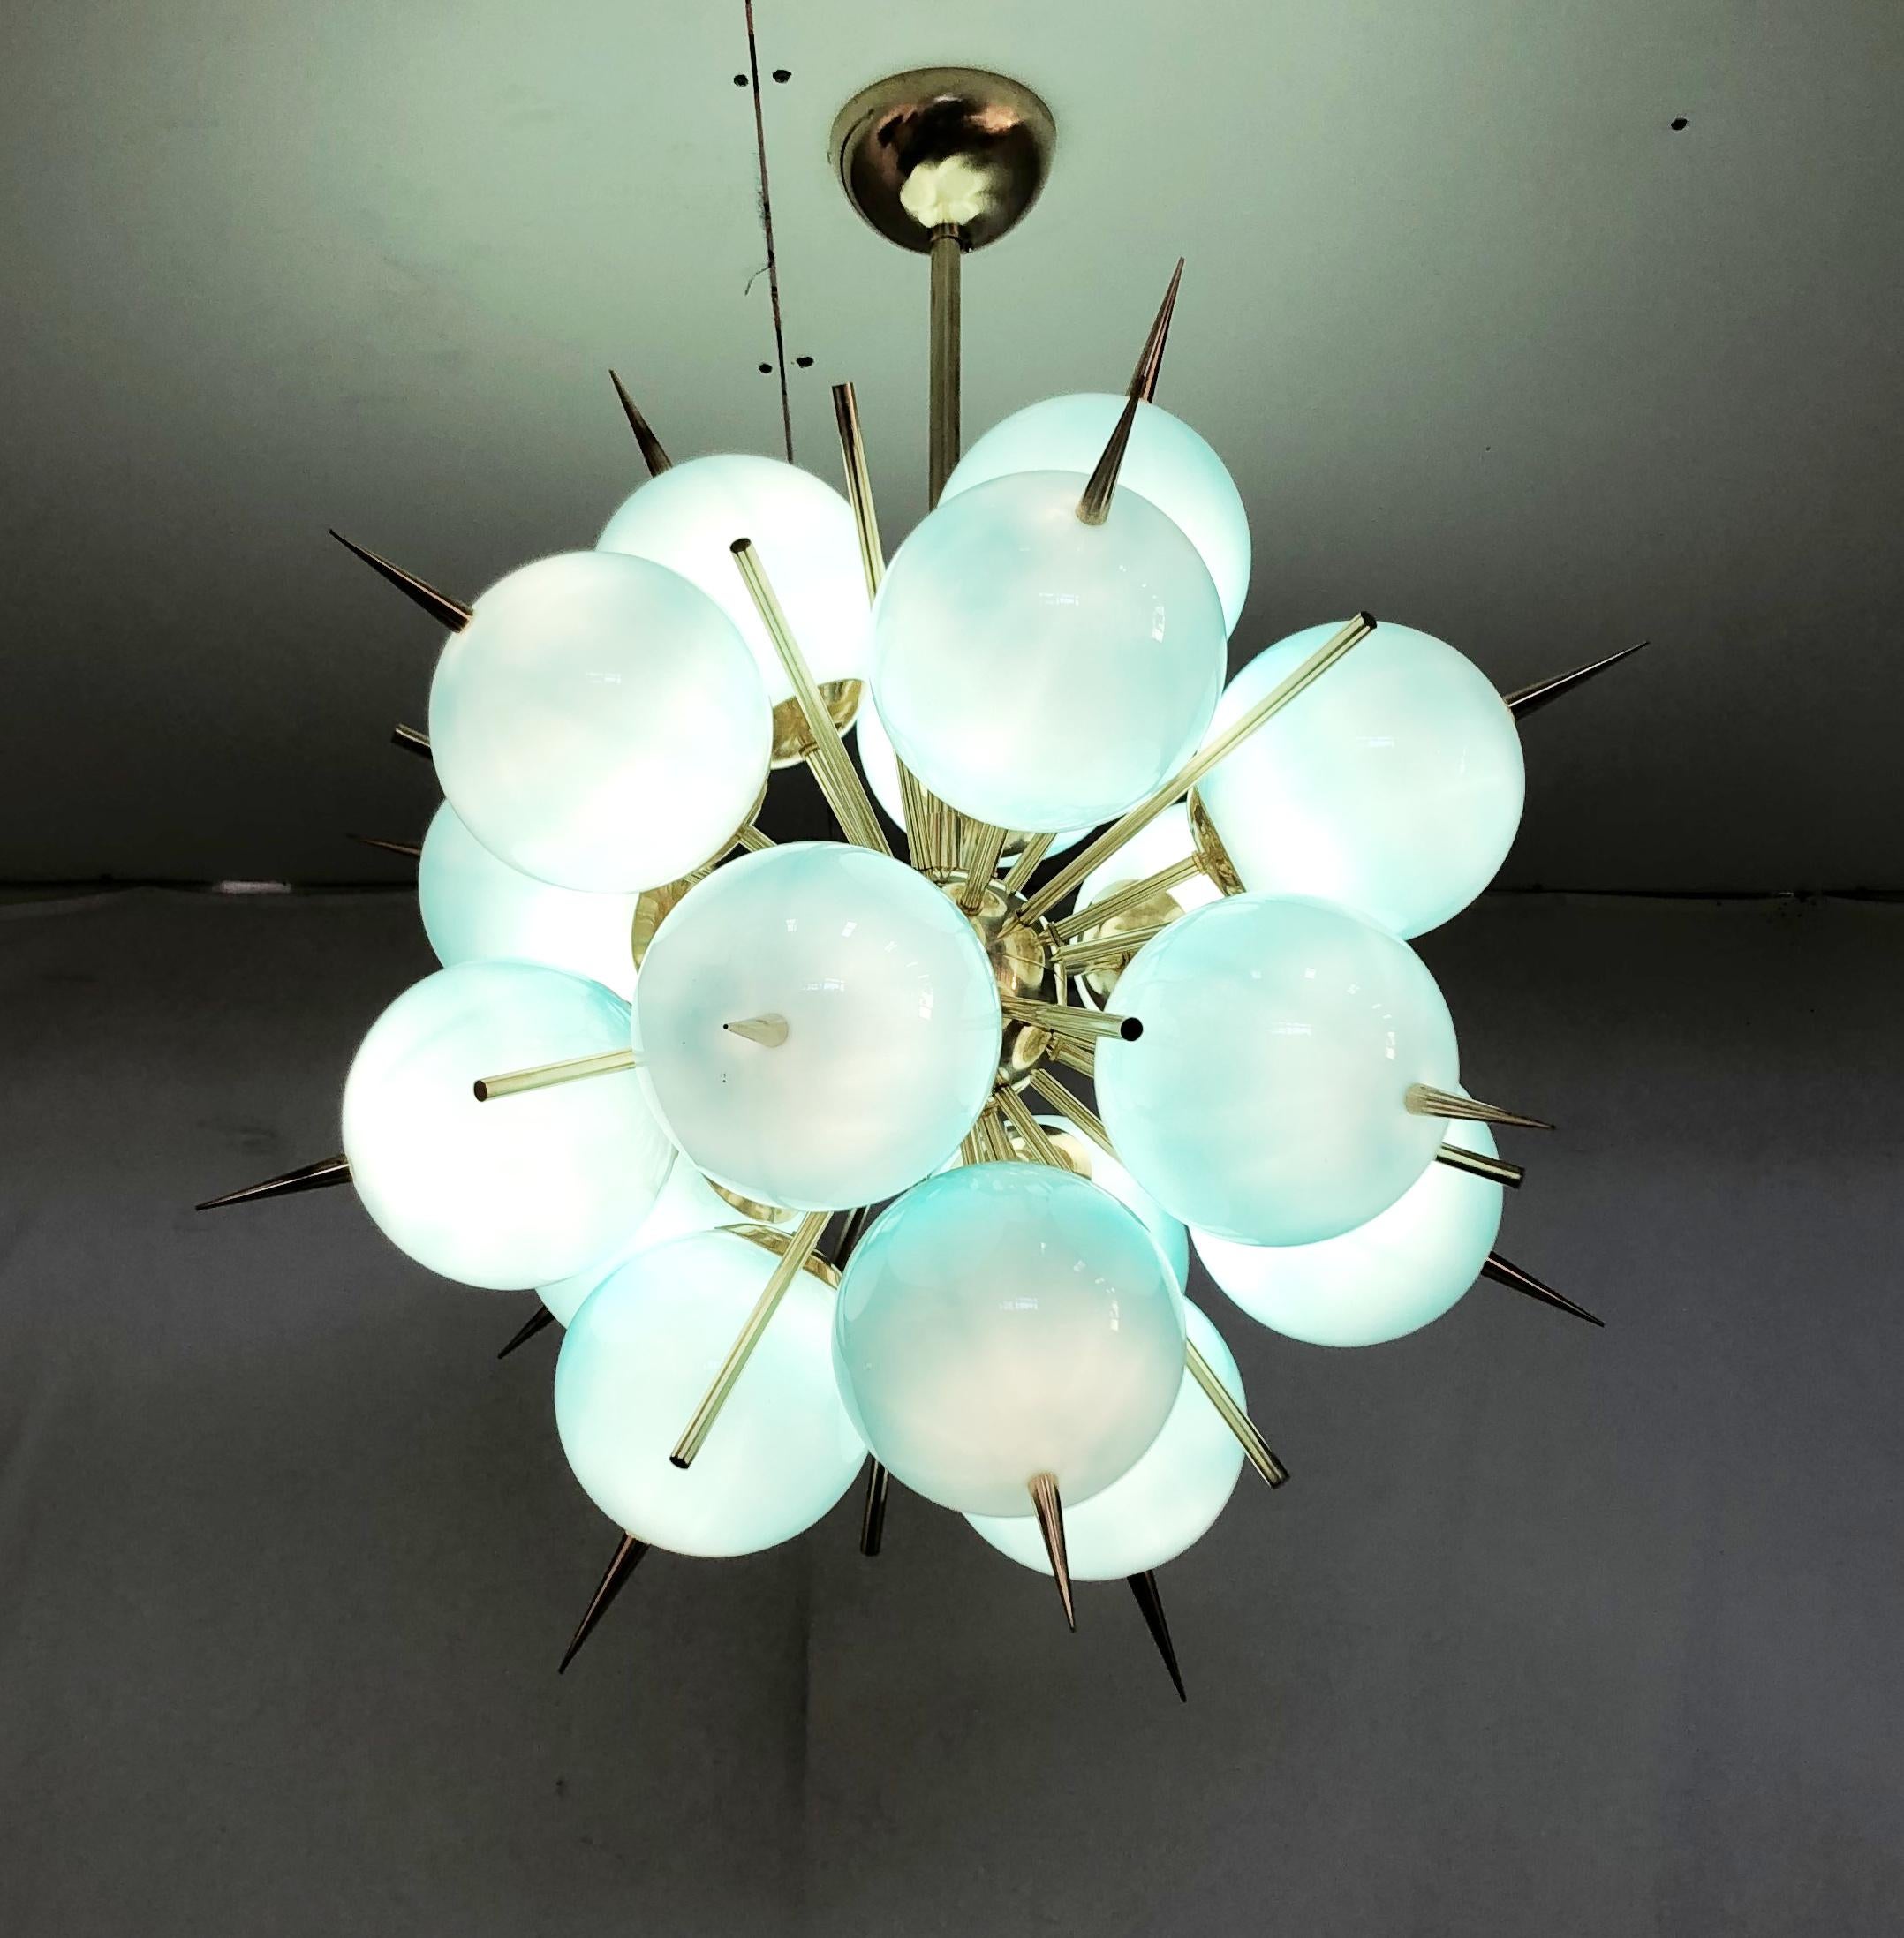 Italian sputnik chandelier with 18 Tiffany blue Murano glass globes and solid brass spikes mounted on brass frame / Designed by Fabio Bergomi for Fabio Ltd / Made in Italy
18 lights / E12 or E14 type / max 40W each
Measures: Diameter 28 inches,